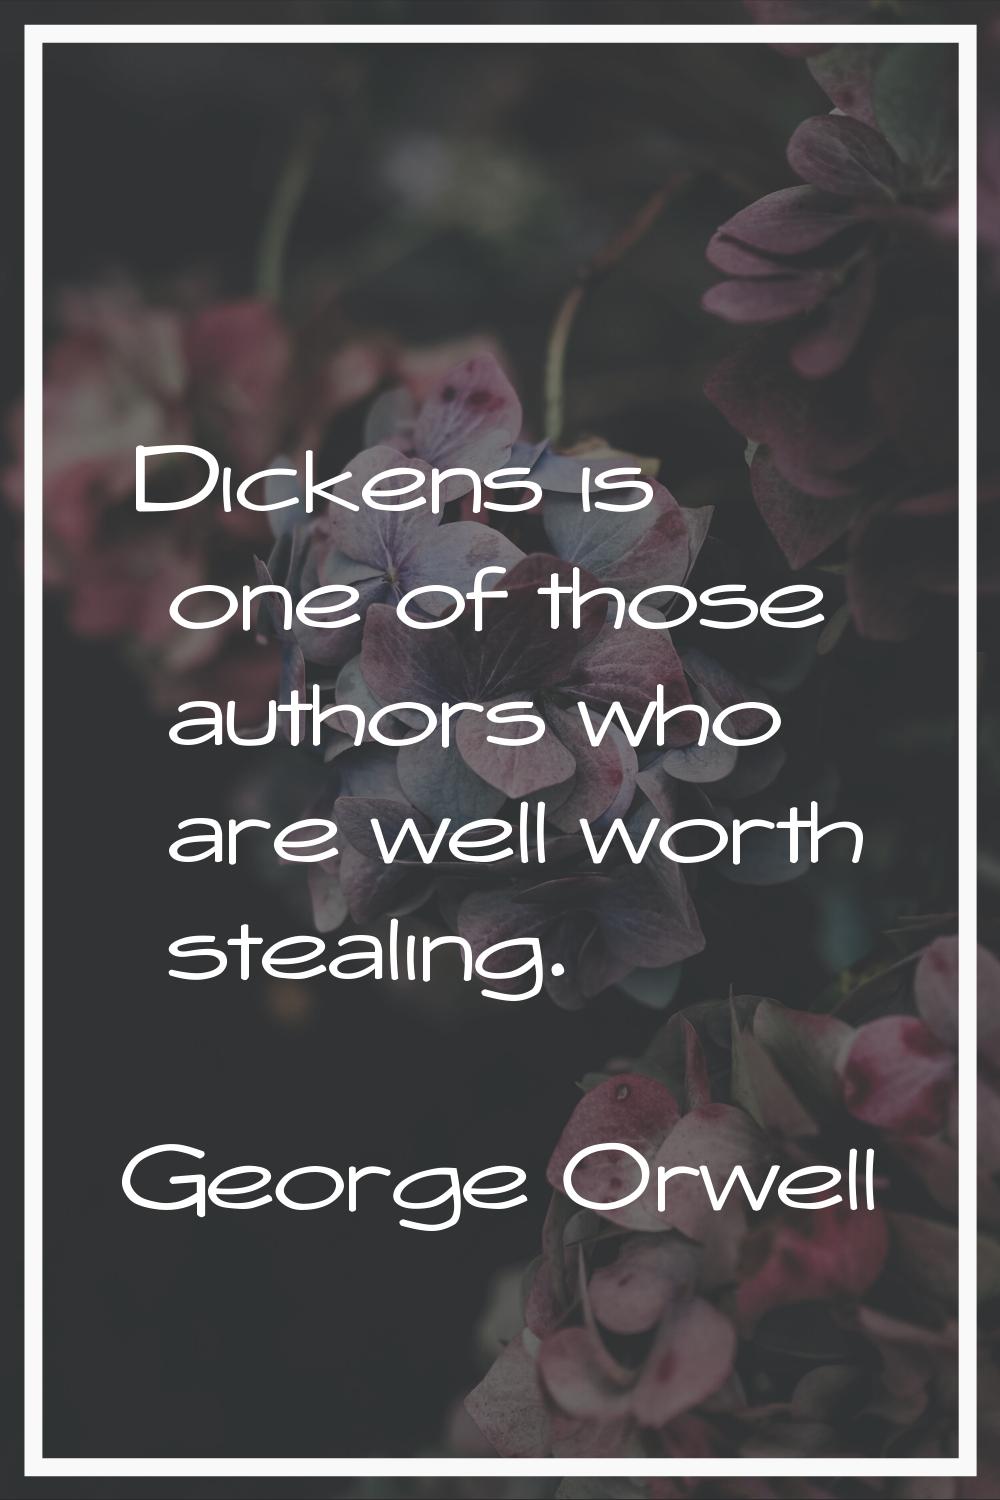 Dickens is one of those authors who are well worth stealing.